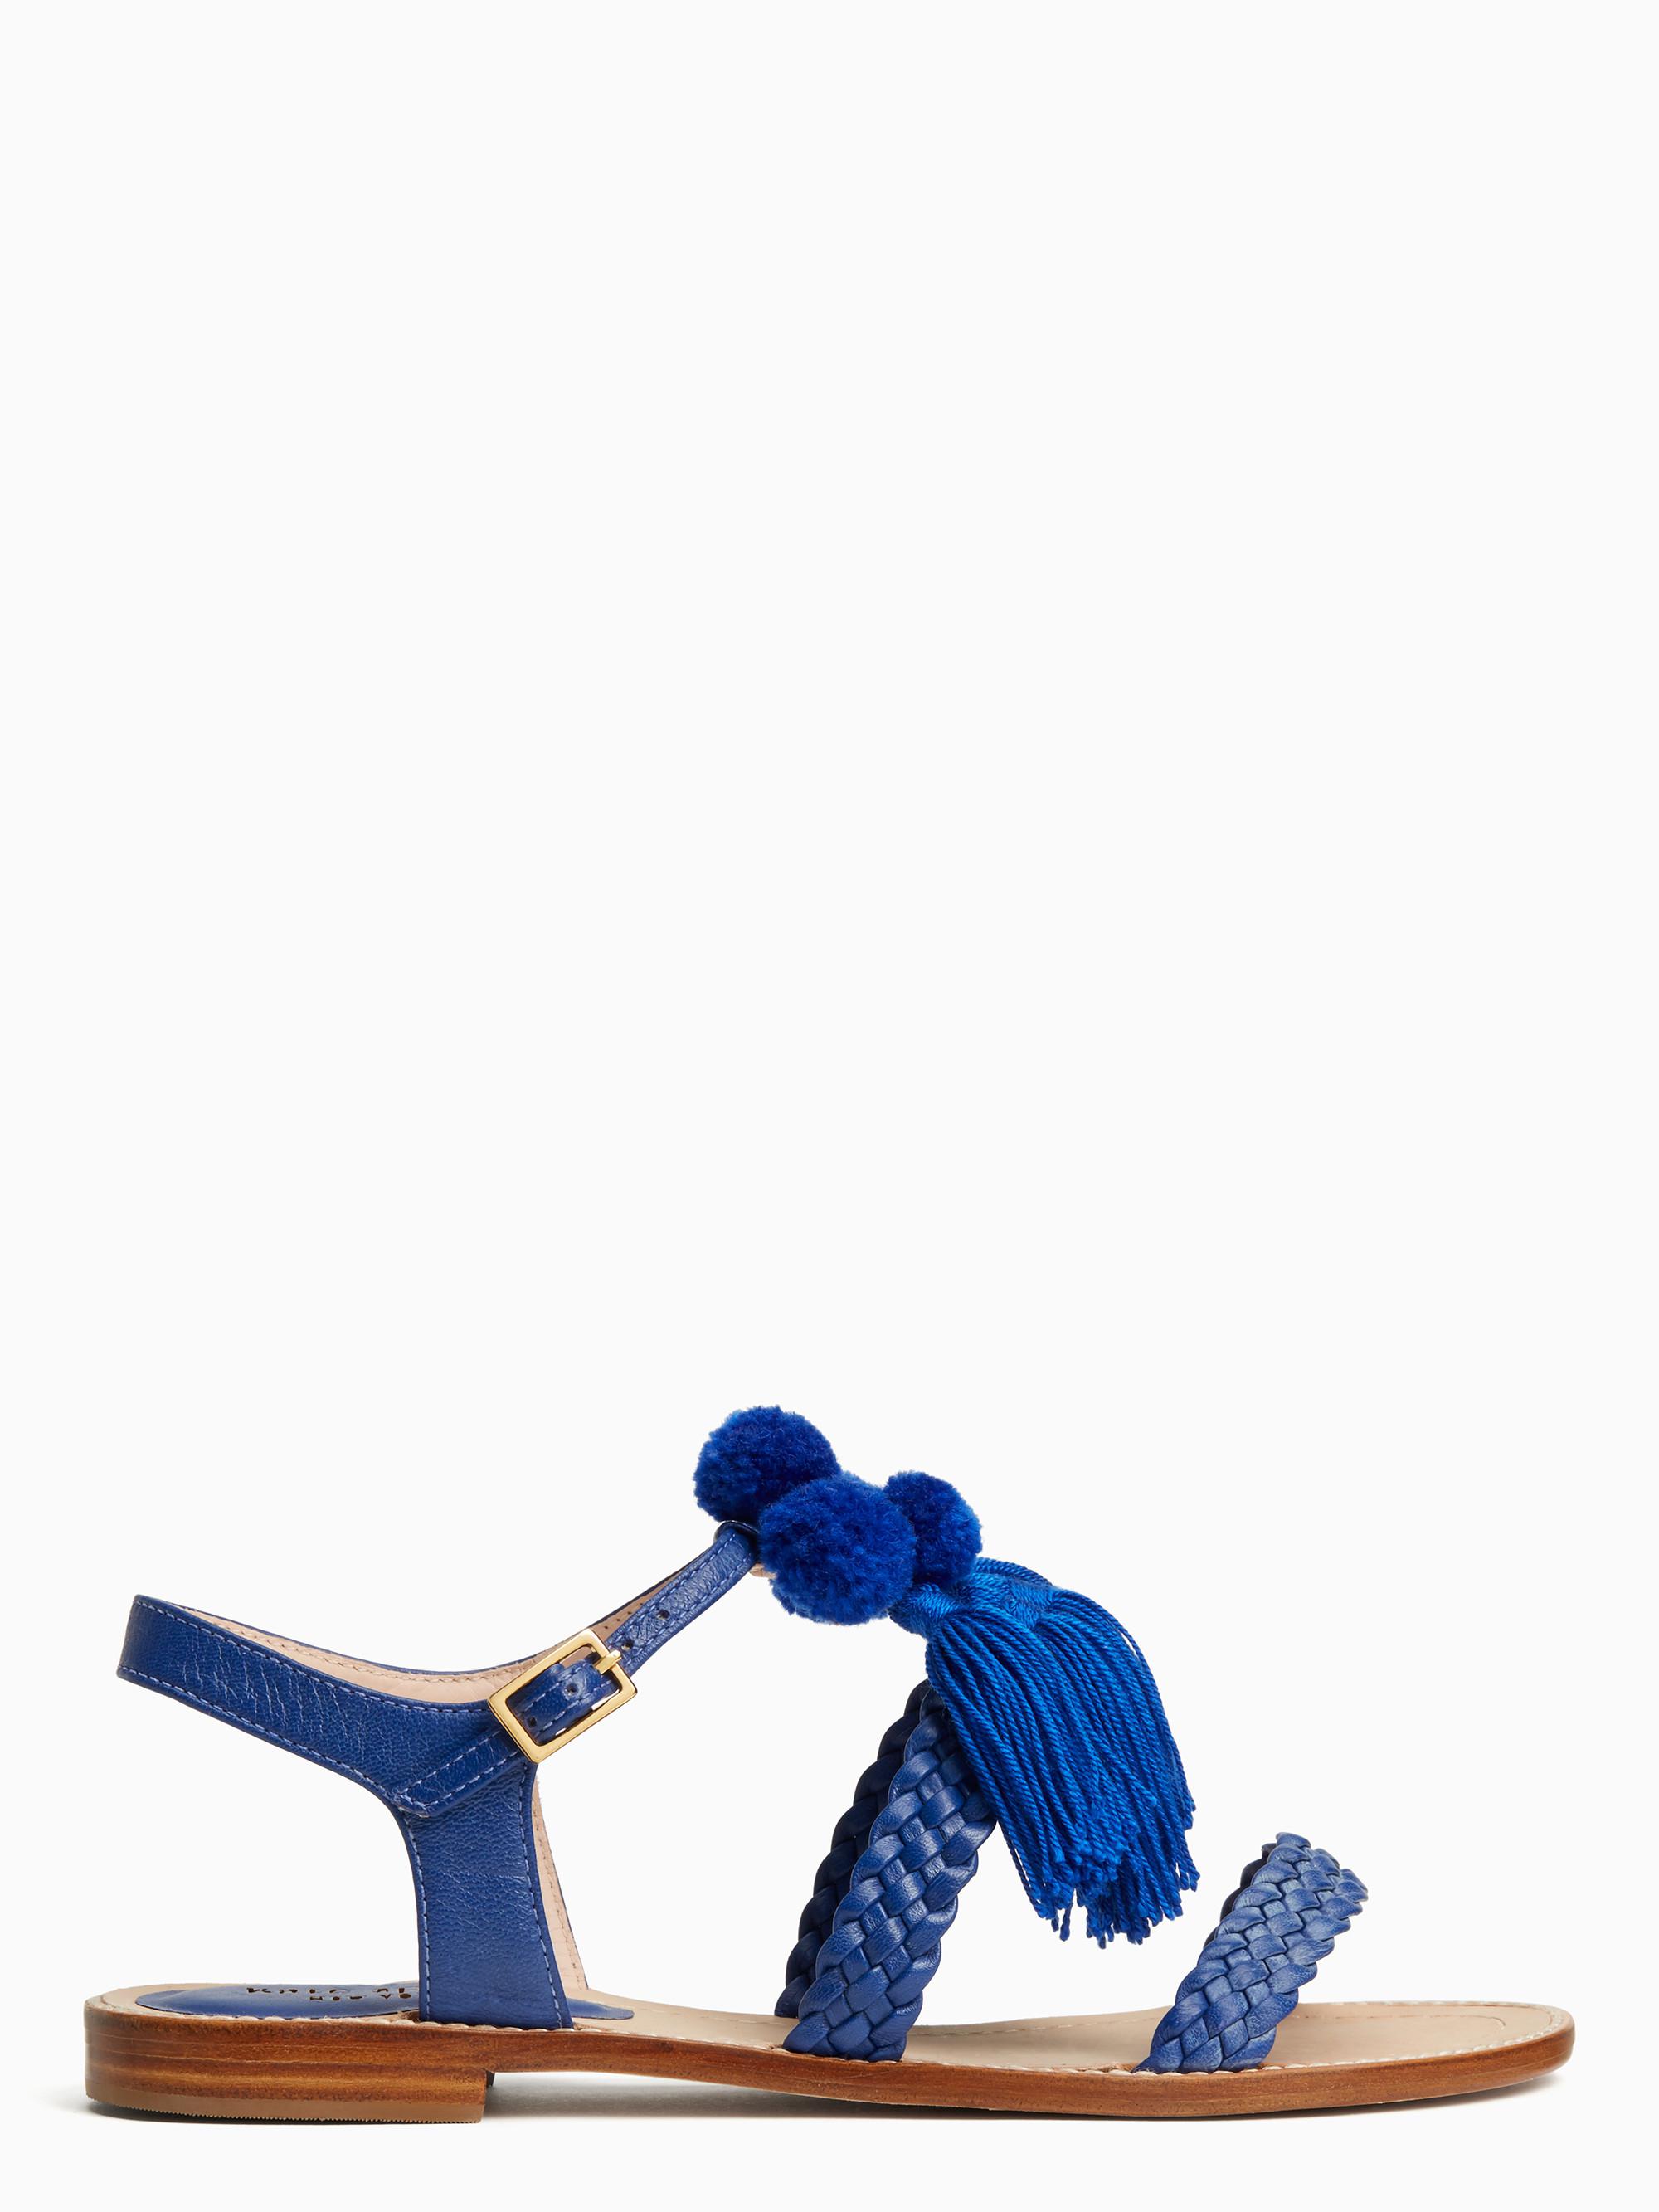 Kate Spade Leather Sunset Sandals in Cobalt (Blue) - Lyst